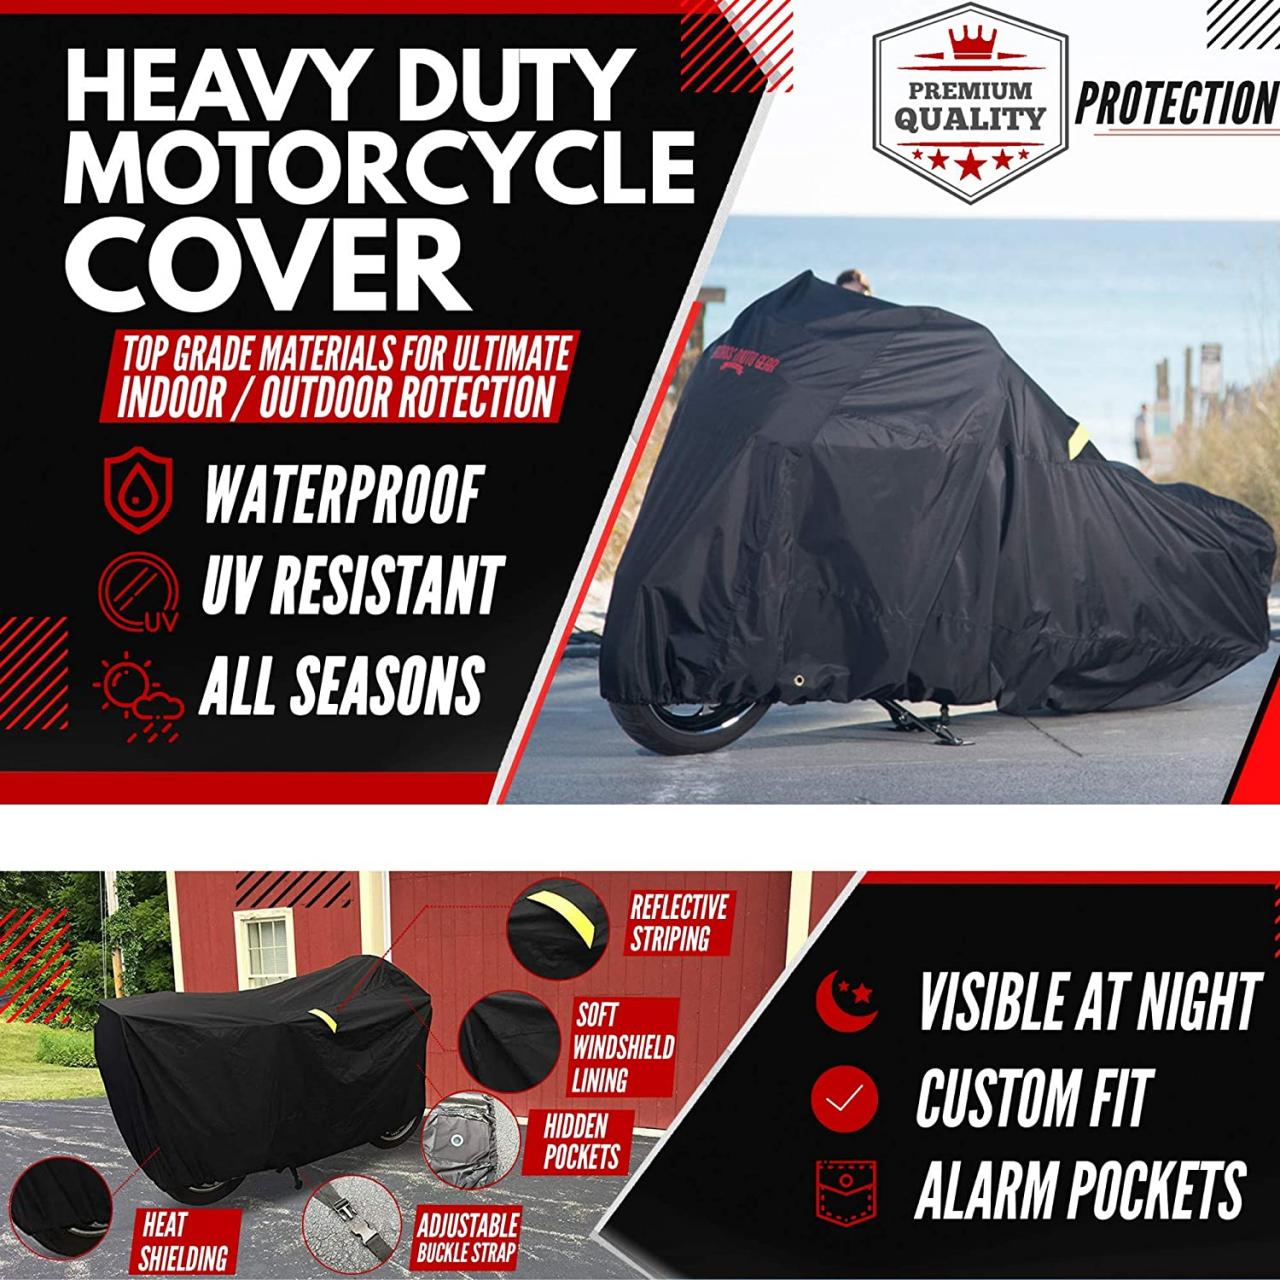 Badass Moto Gear Waterproof Motorcycle Cover Review | The Drive